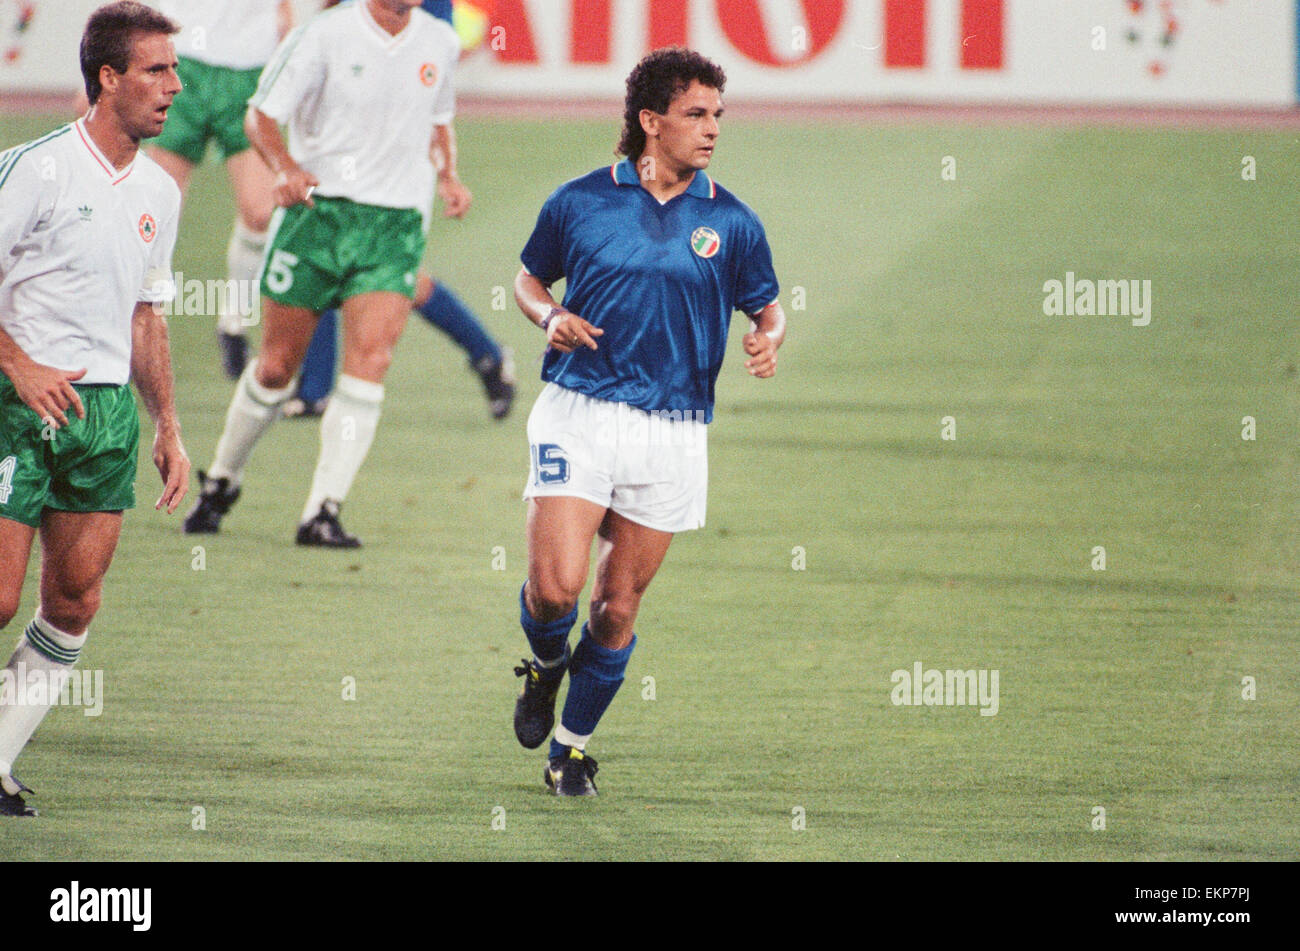 1990 World Cup Quarter Final match in Rome, Italy. Italy 1 v Republic of Ireland 0. Italy's Roberto Baggio watched by Mick McCarthy. 30th June 1990. Stock Photo